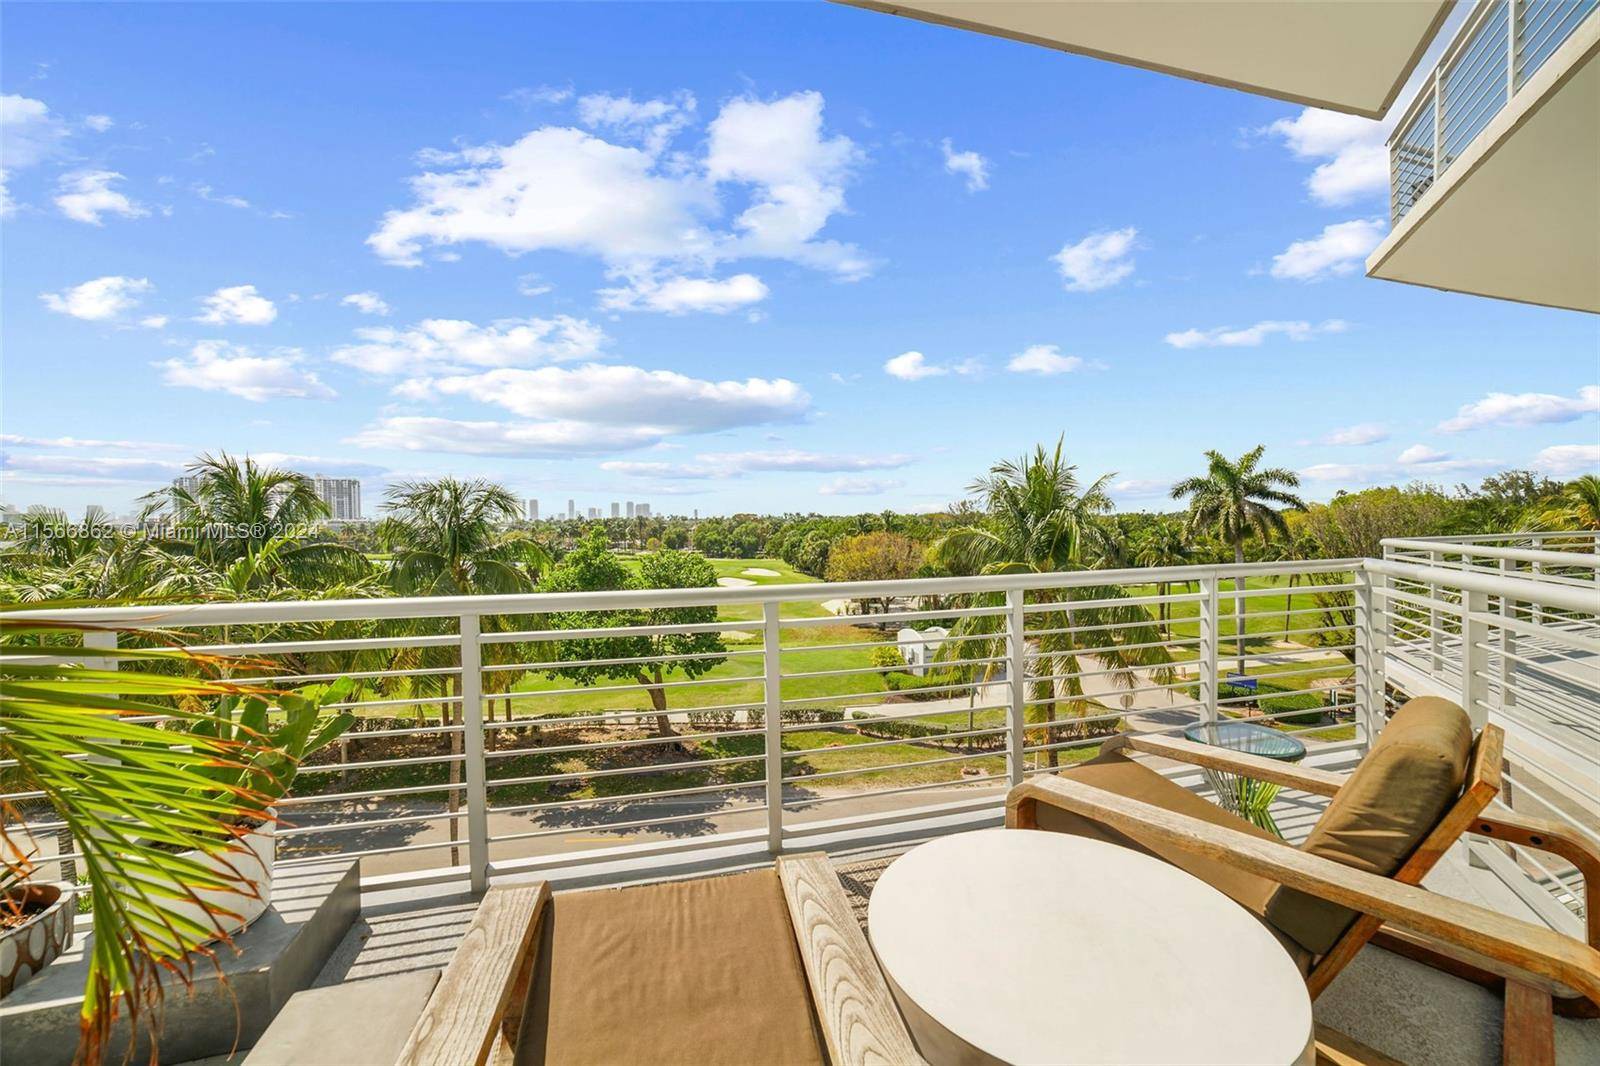 Indulge in the ultimate Miami Beach lifestyle with this unique 2 bedroom, 2.